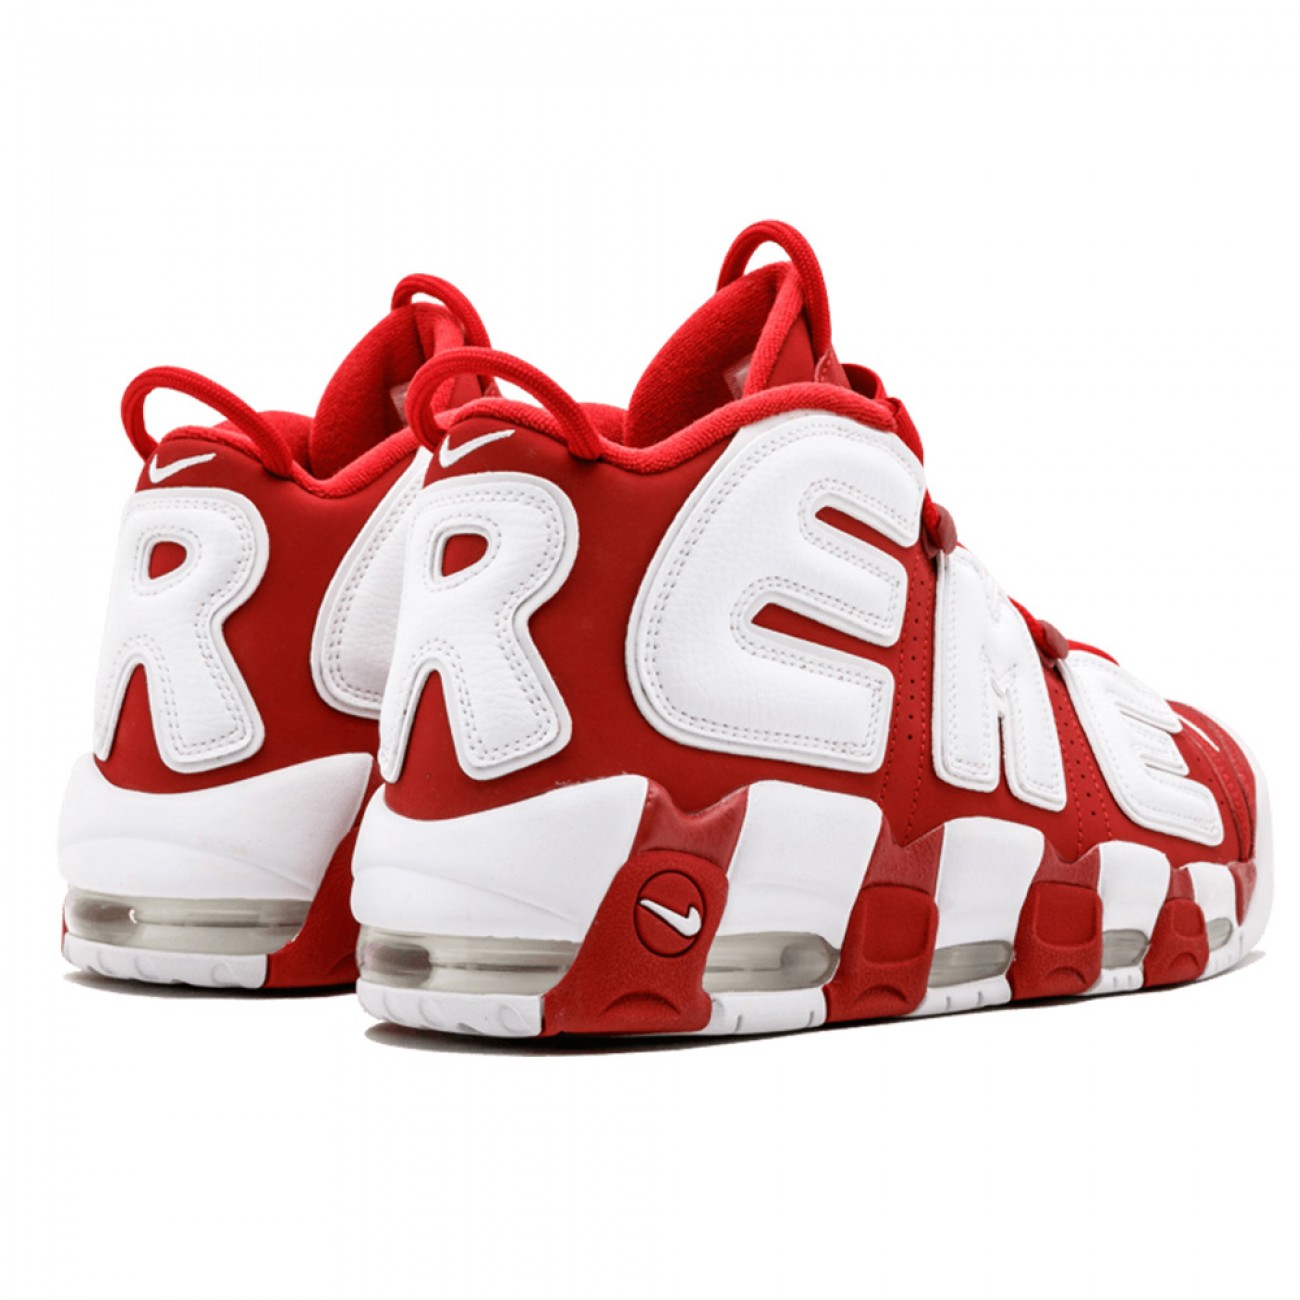 SUPREME X NIKE AIR MORE UPTEMPO VARSITY RED